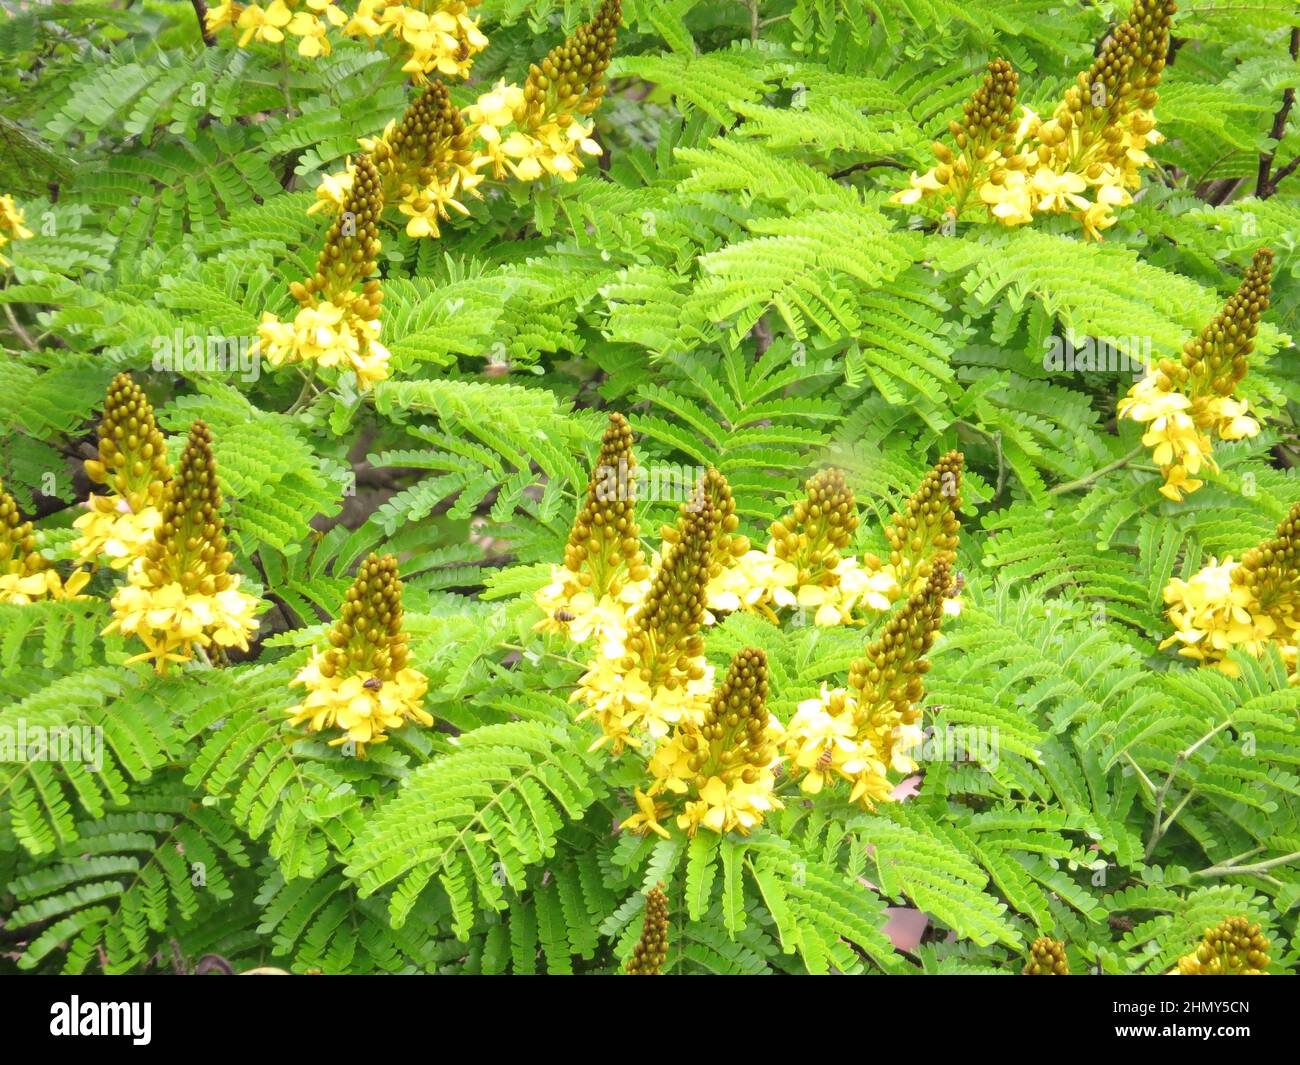 Tree with yellow flowers Stock Photo